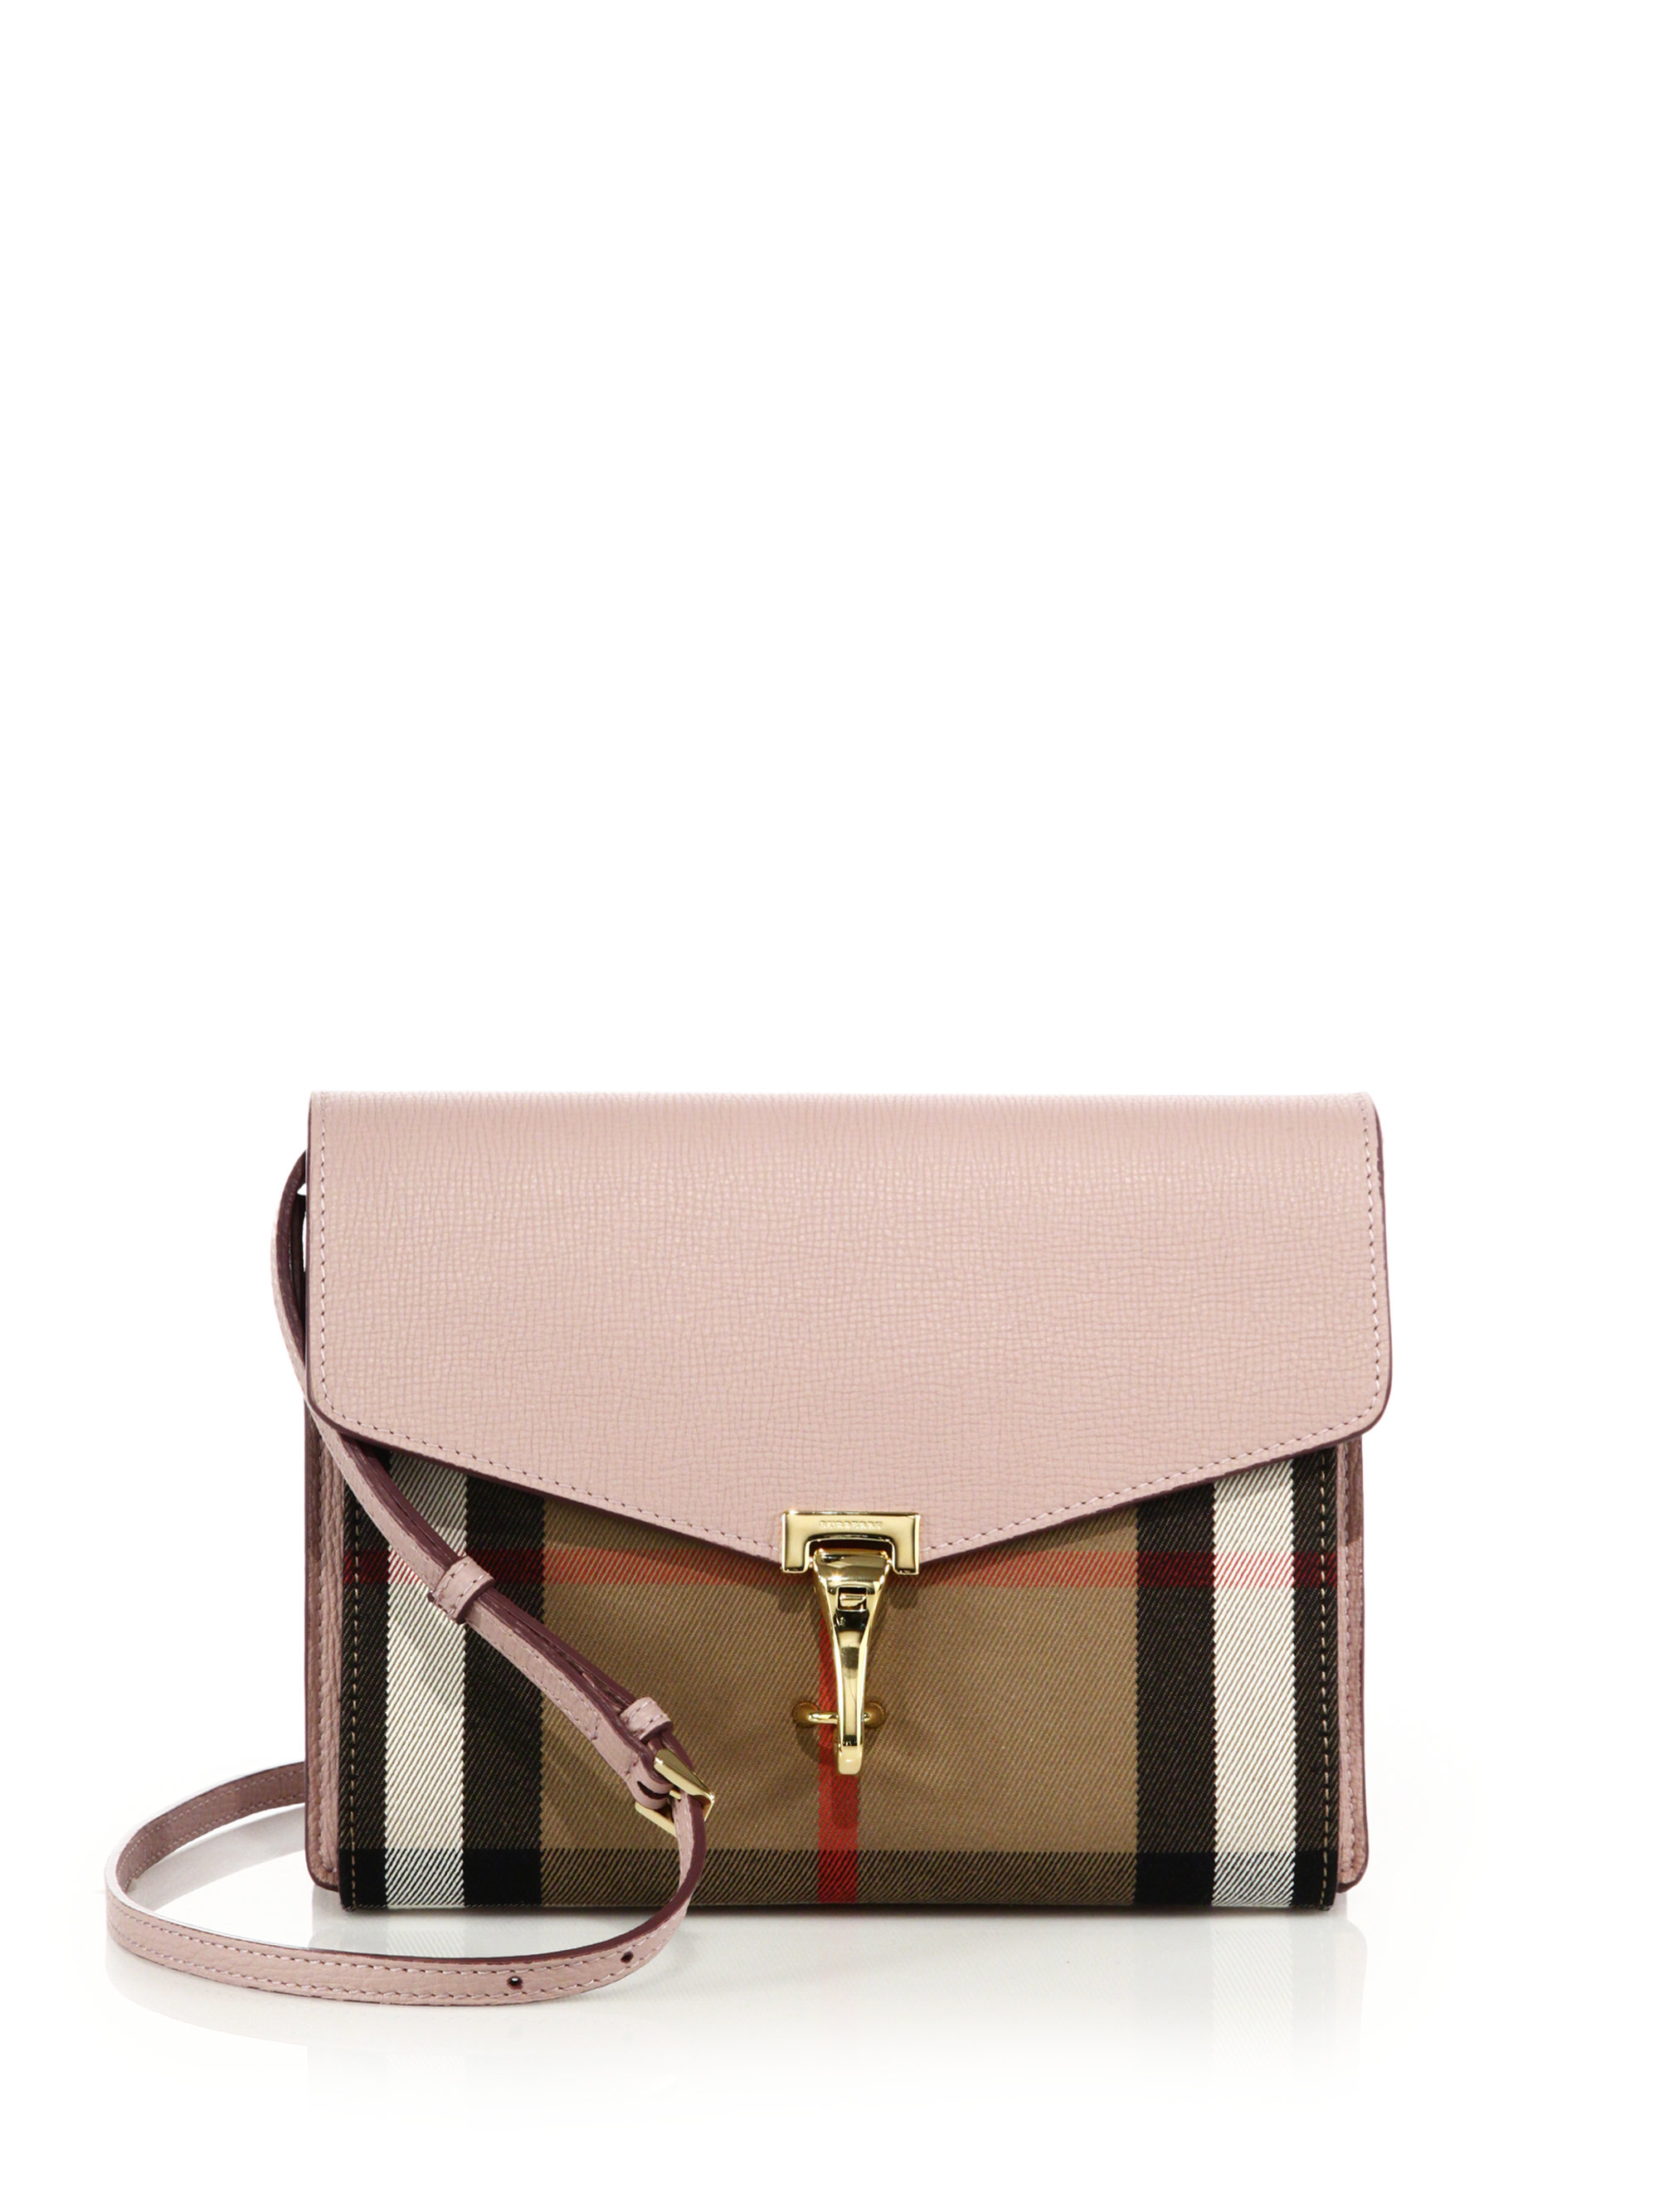 Burberry Macken Small Leather & House Check Canvas Crossbody Bag in Pink | Lyst